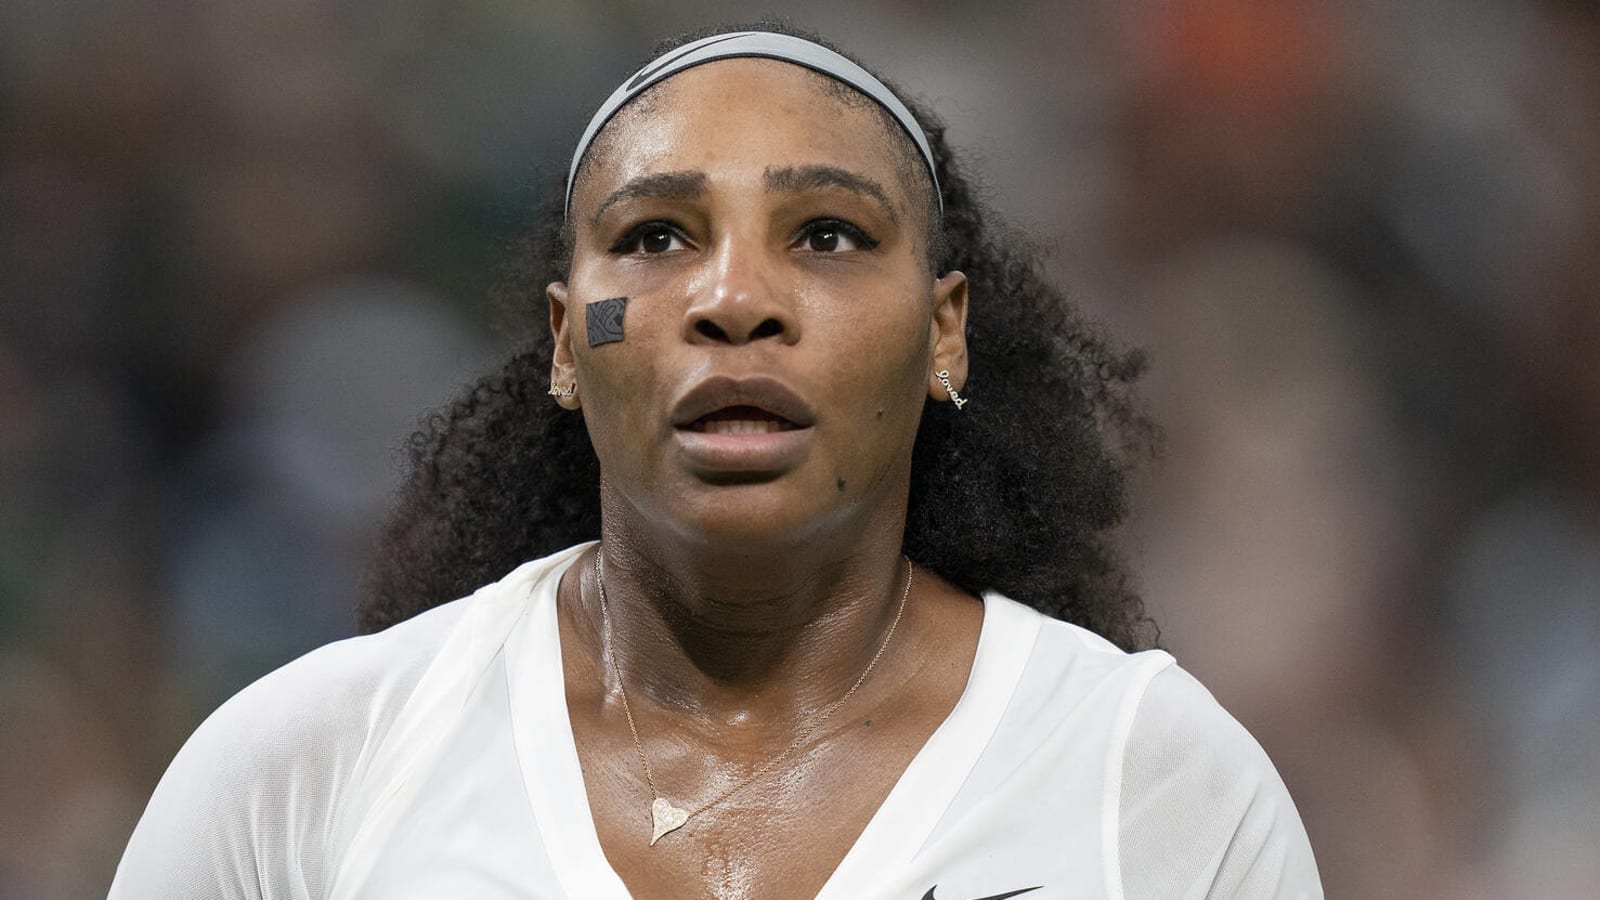 Serena Williams to play in National Bank Open ahead of U.S. Open